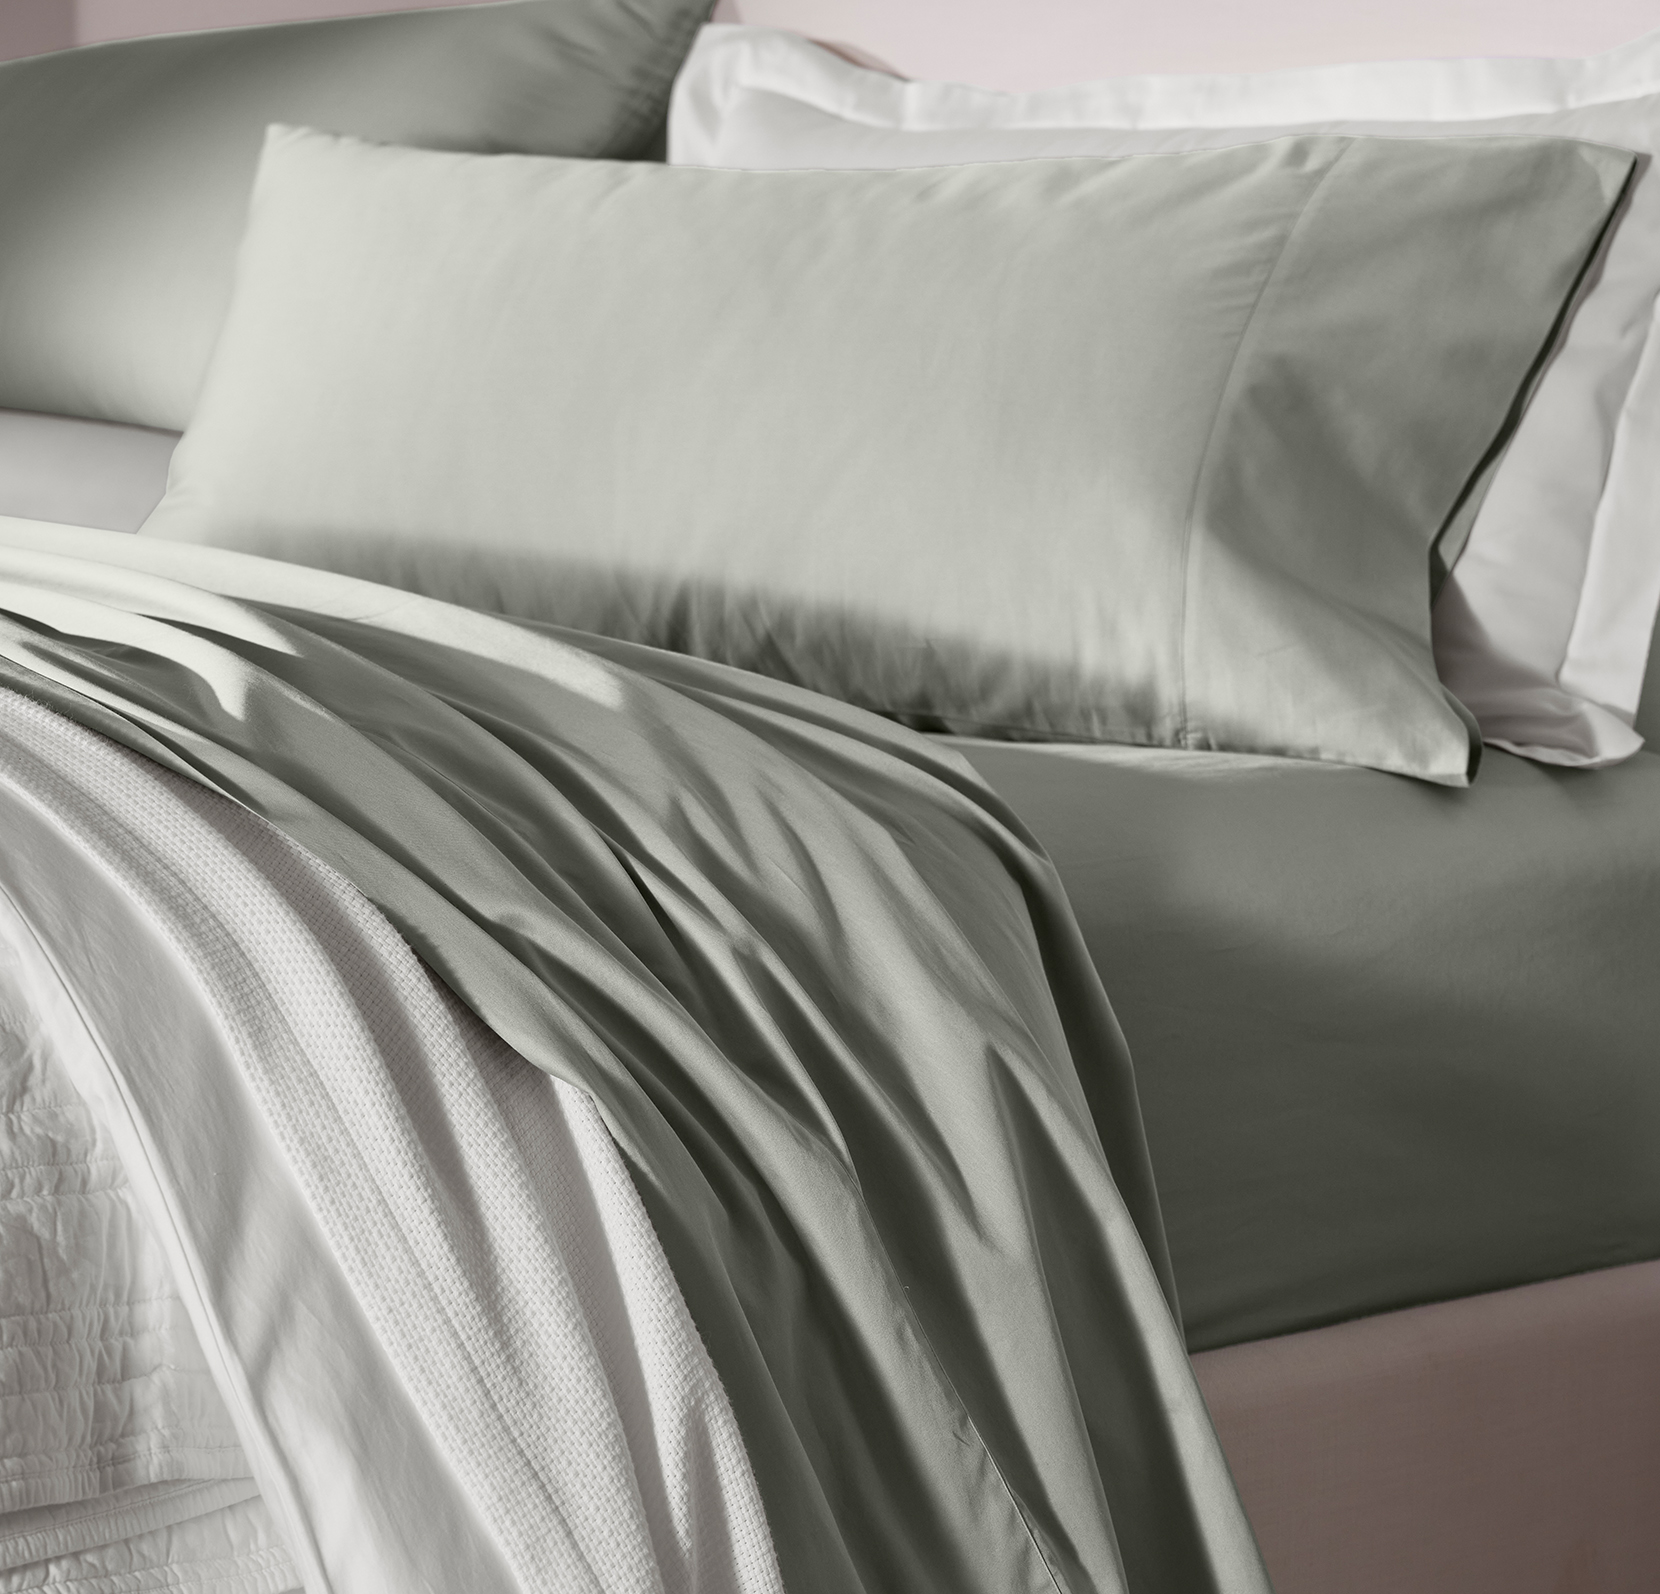 Ethically Made Organic Cotton Sheets from Boll & Branch - COOL HUNTING®